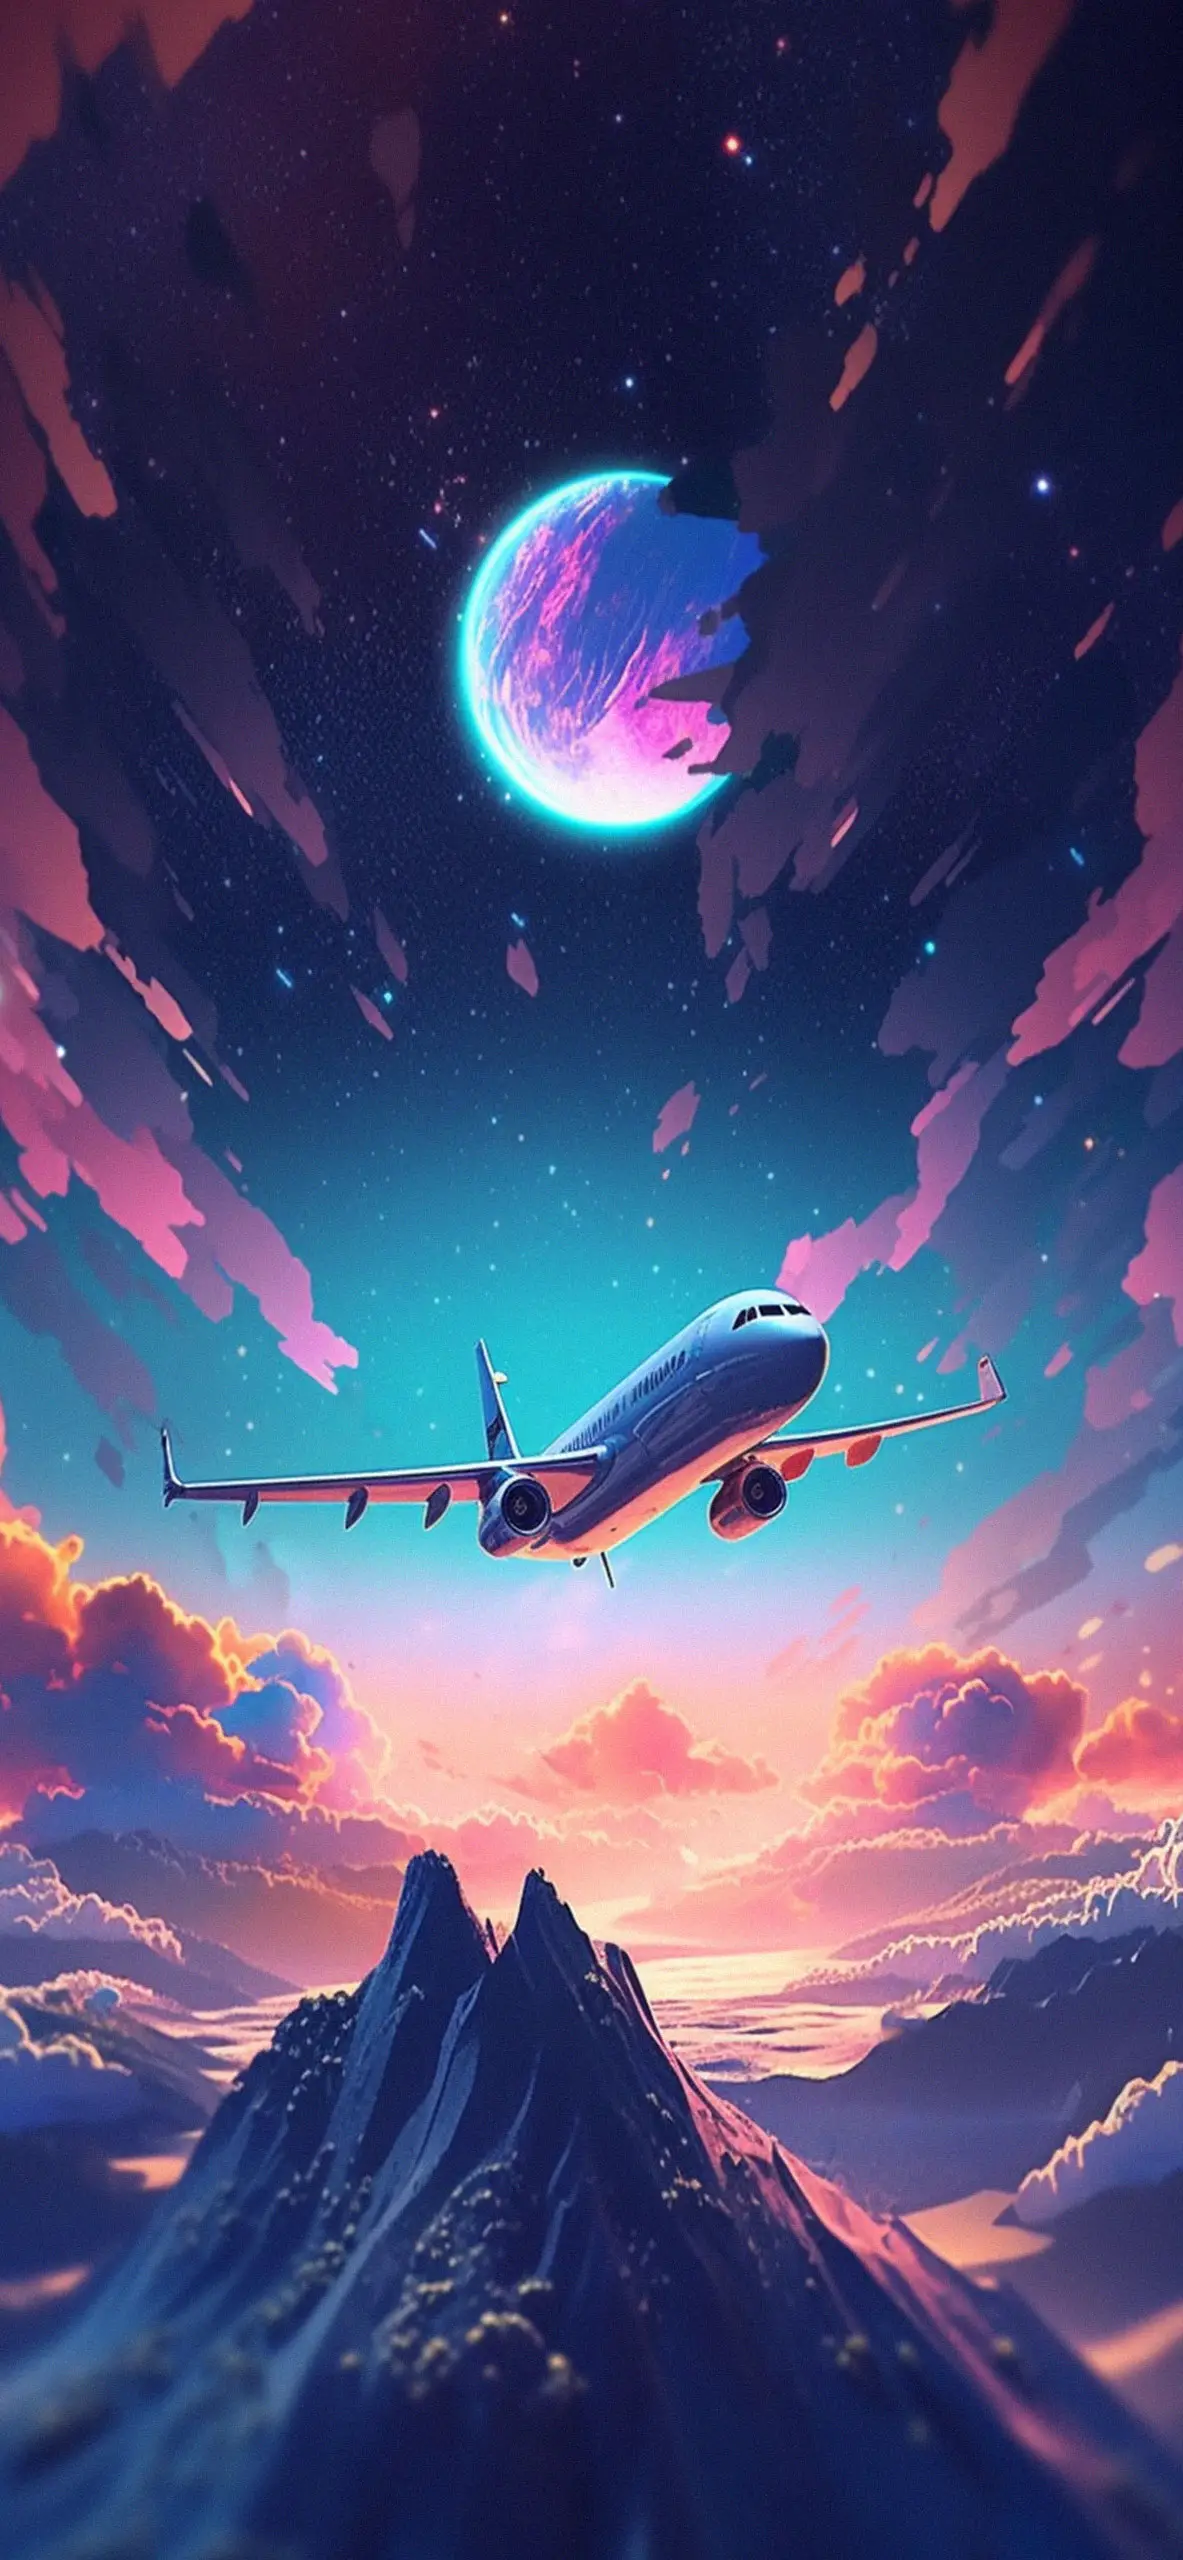 The Plane Flying above the Mountains Art Wallpaper